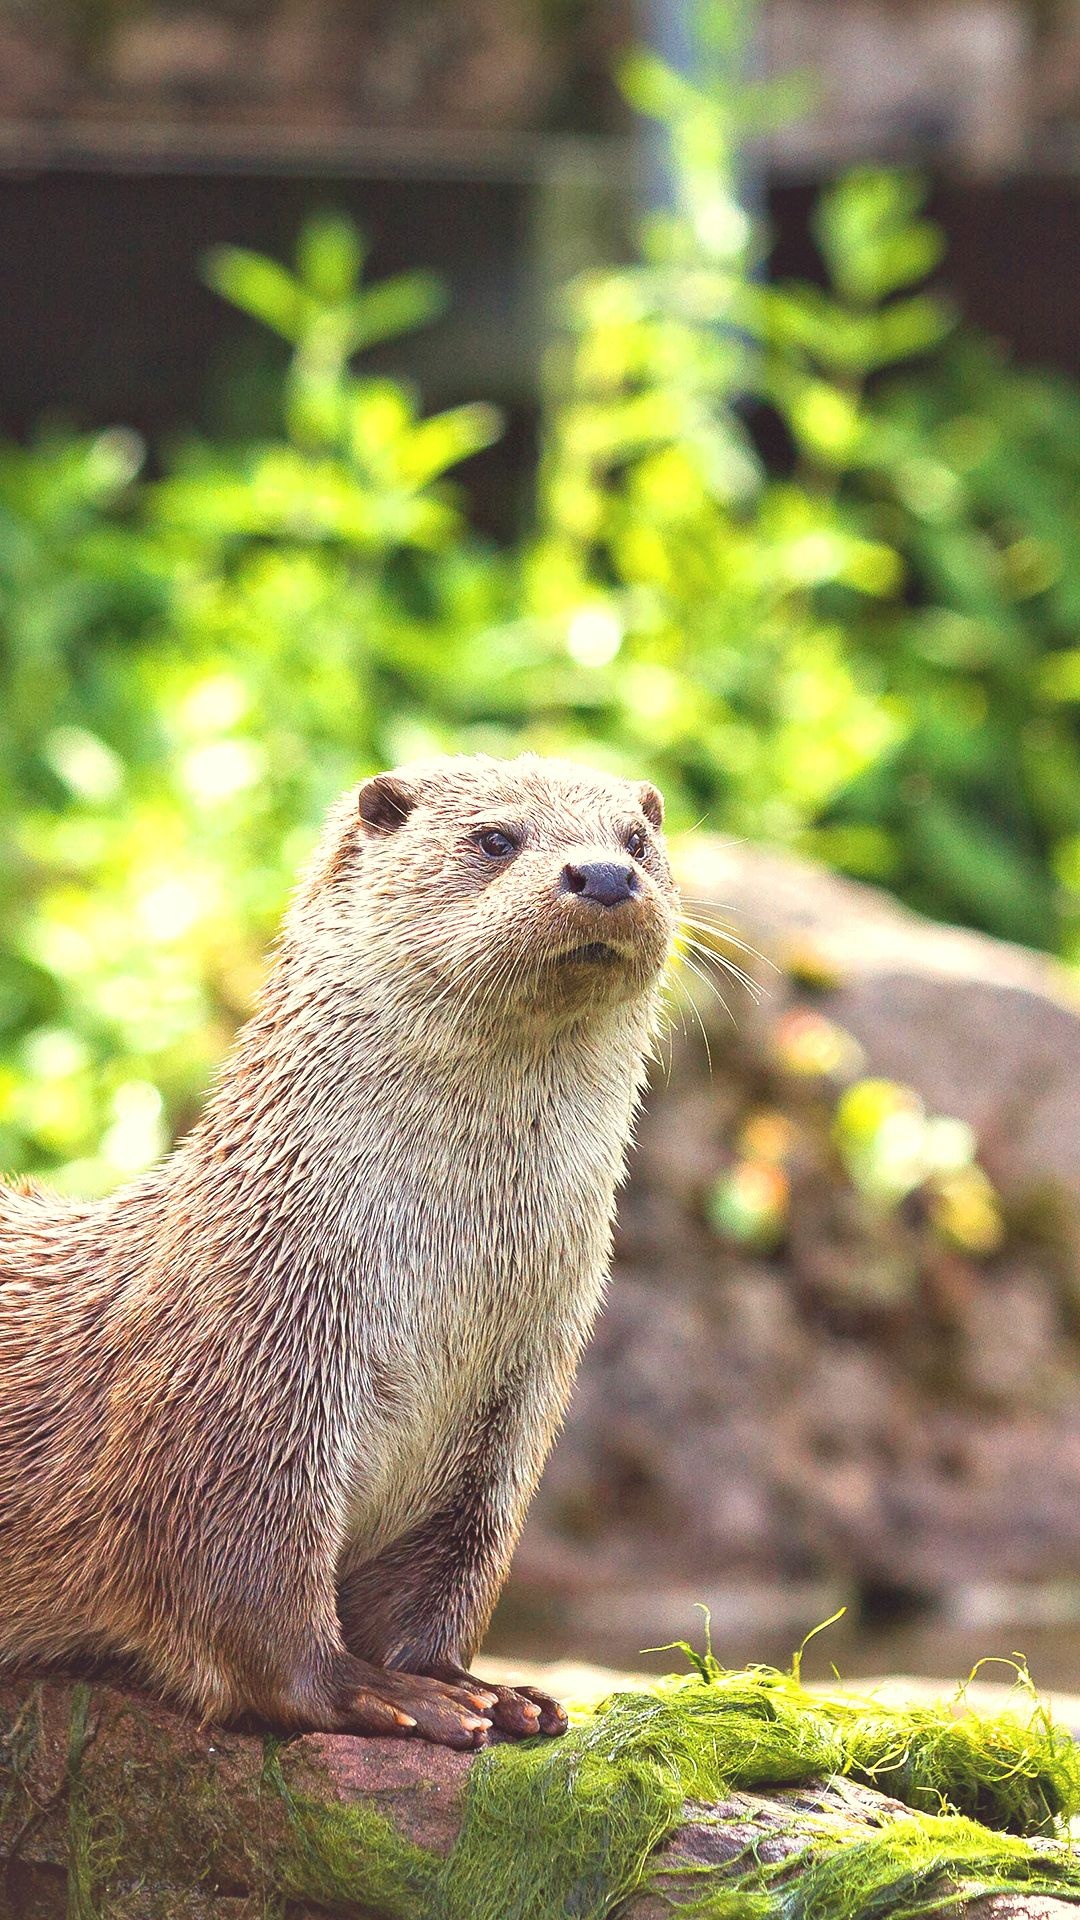 User-shared otter wallpapers, Diverse otter selection, Community's otter appreciation, Contribute to the collection, 1080x1920 Full HD Phone